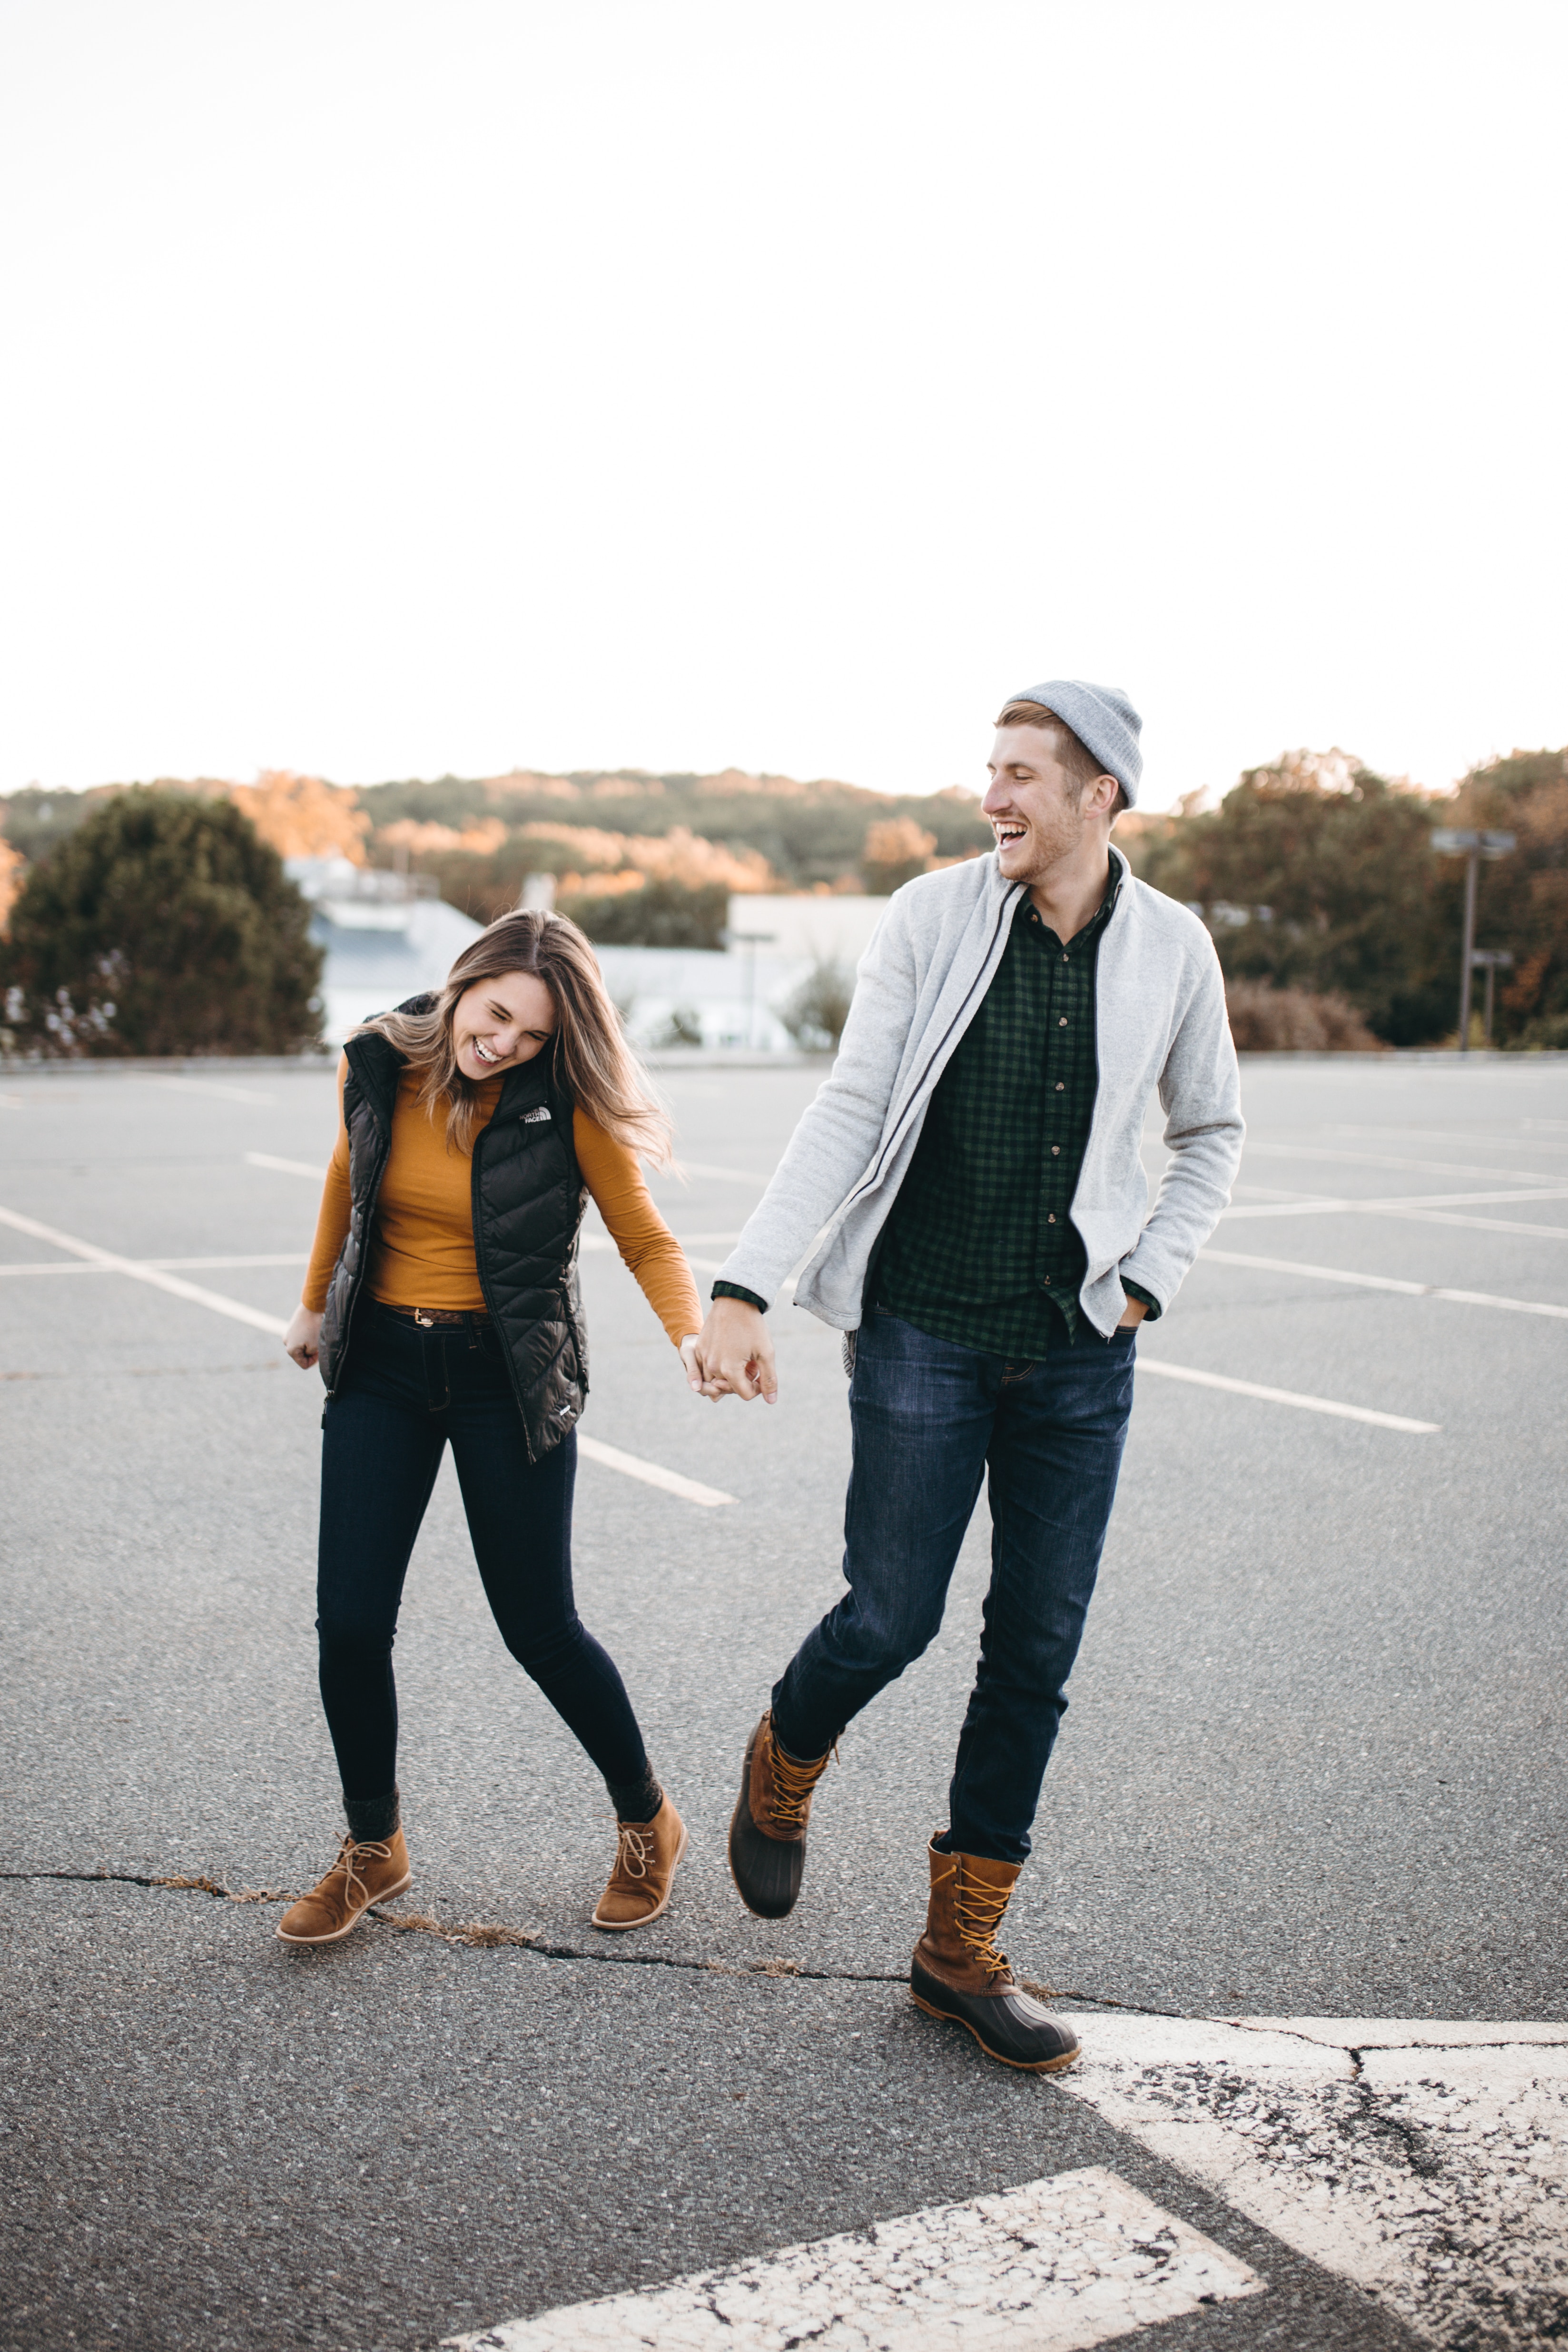 A couple holding hands and laughing. | Source: Unsplash